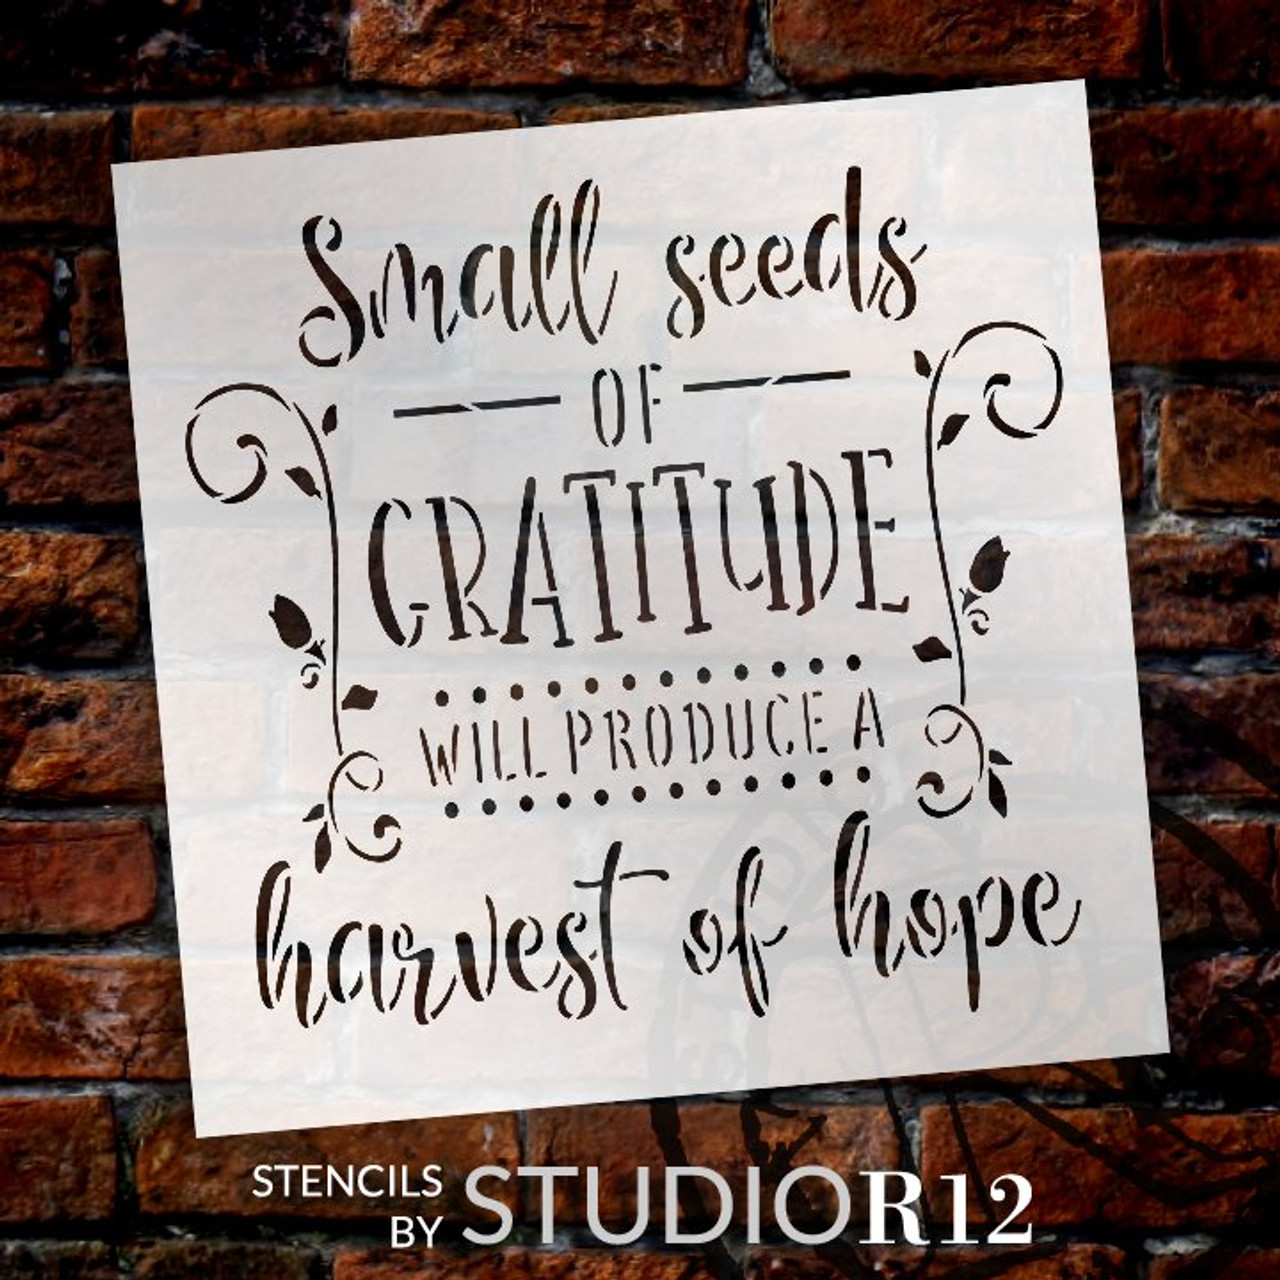 Seeds of Gratitude Harvest of Hope Stencil by StudioR12 | DIY Inspirational Script Word Art Home Decor | Paint Wood Signs | Select Size